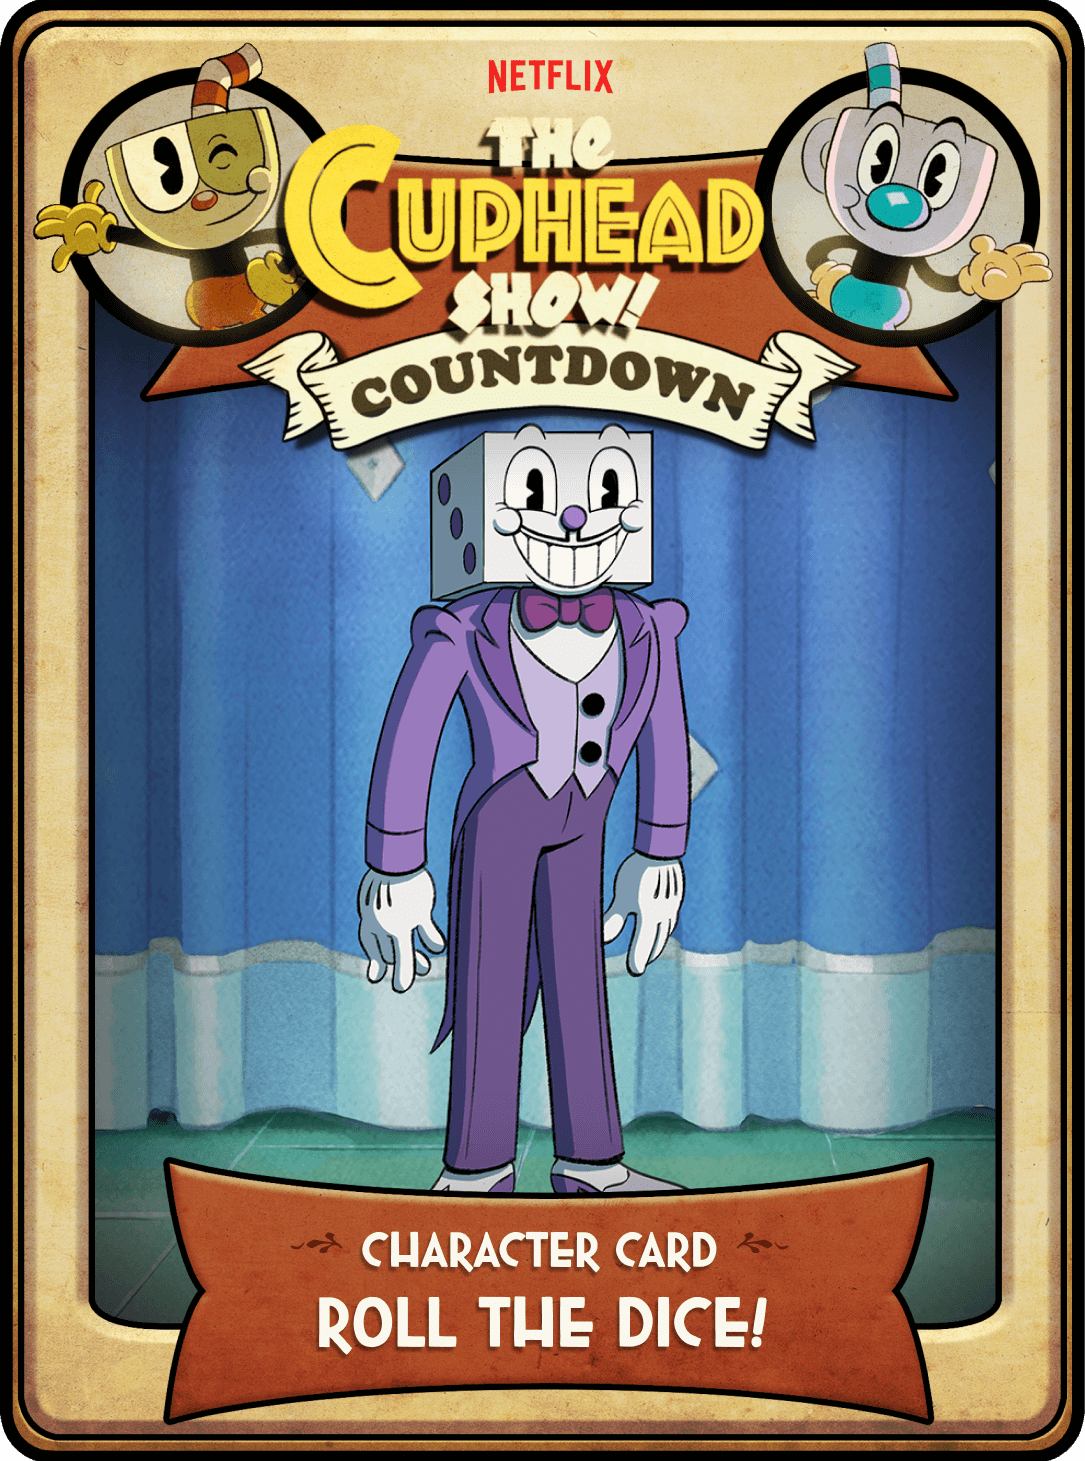 The Cuphead Show Countdown - Awwwards Honorable Mention